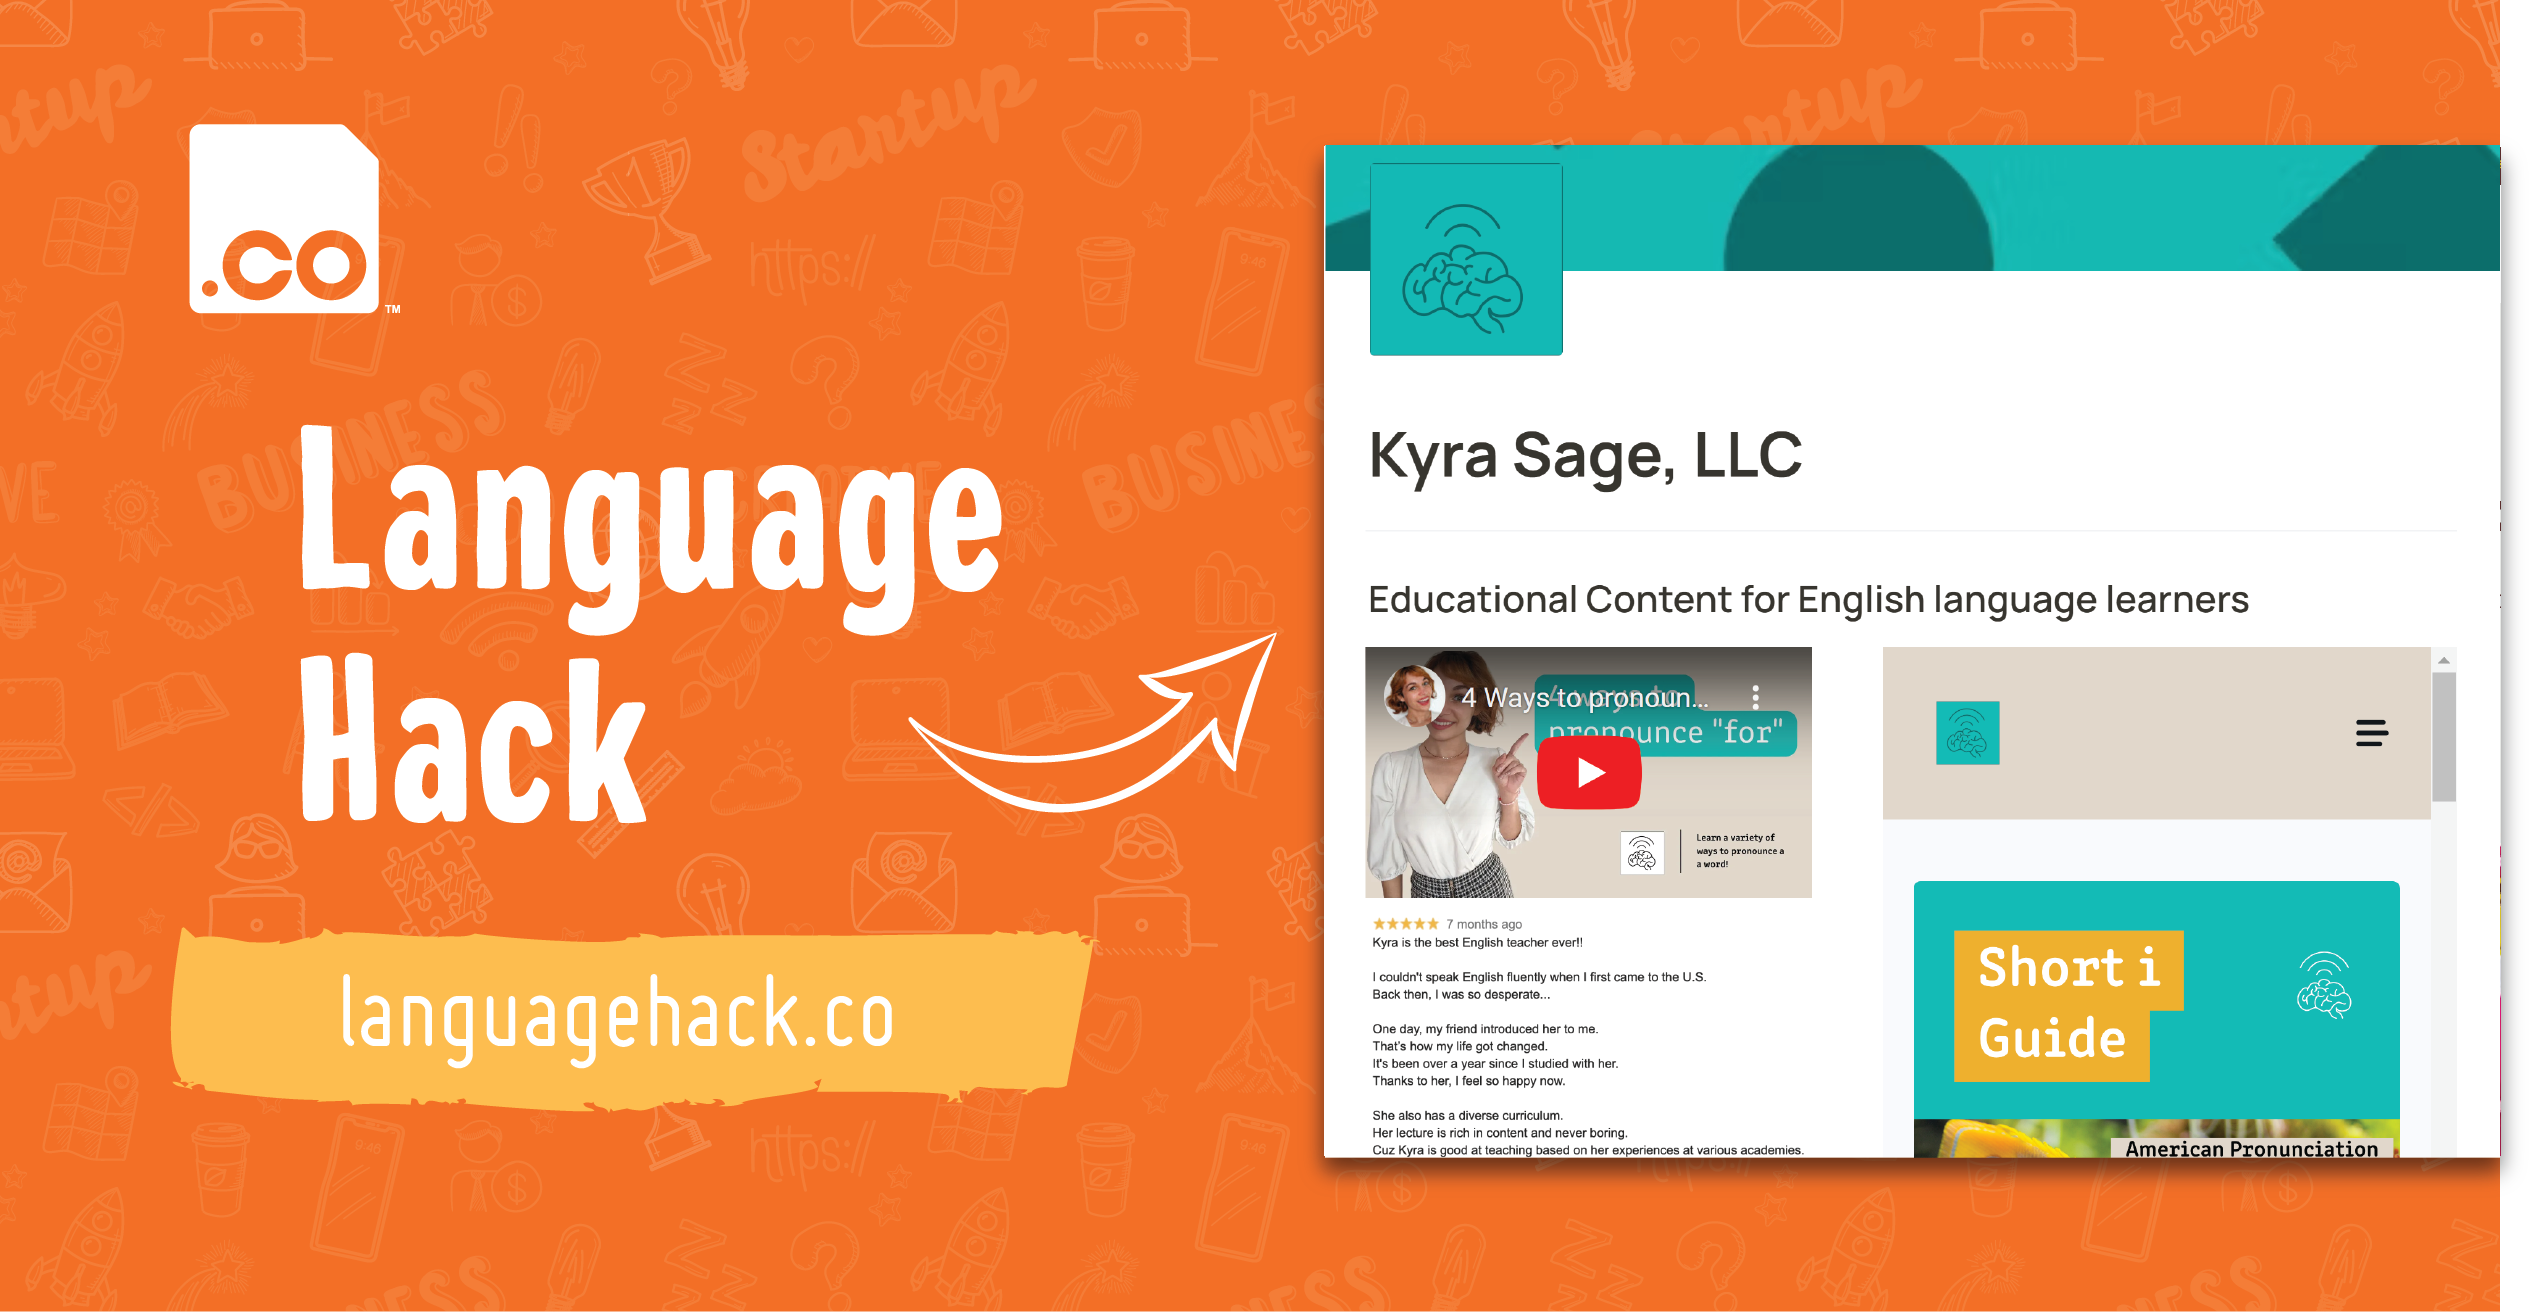 Find Your Niche: LanguageHack.co Specializes in English Skills for Tech Workers